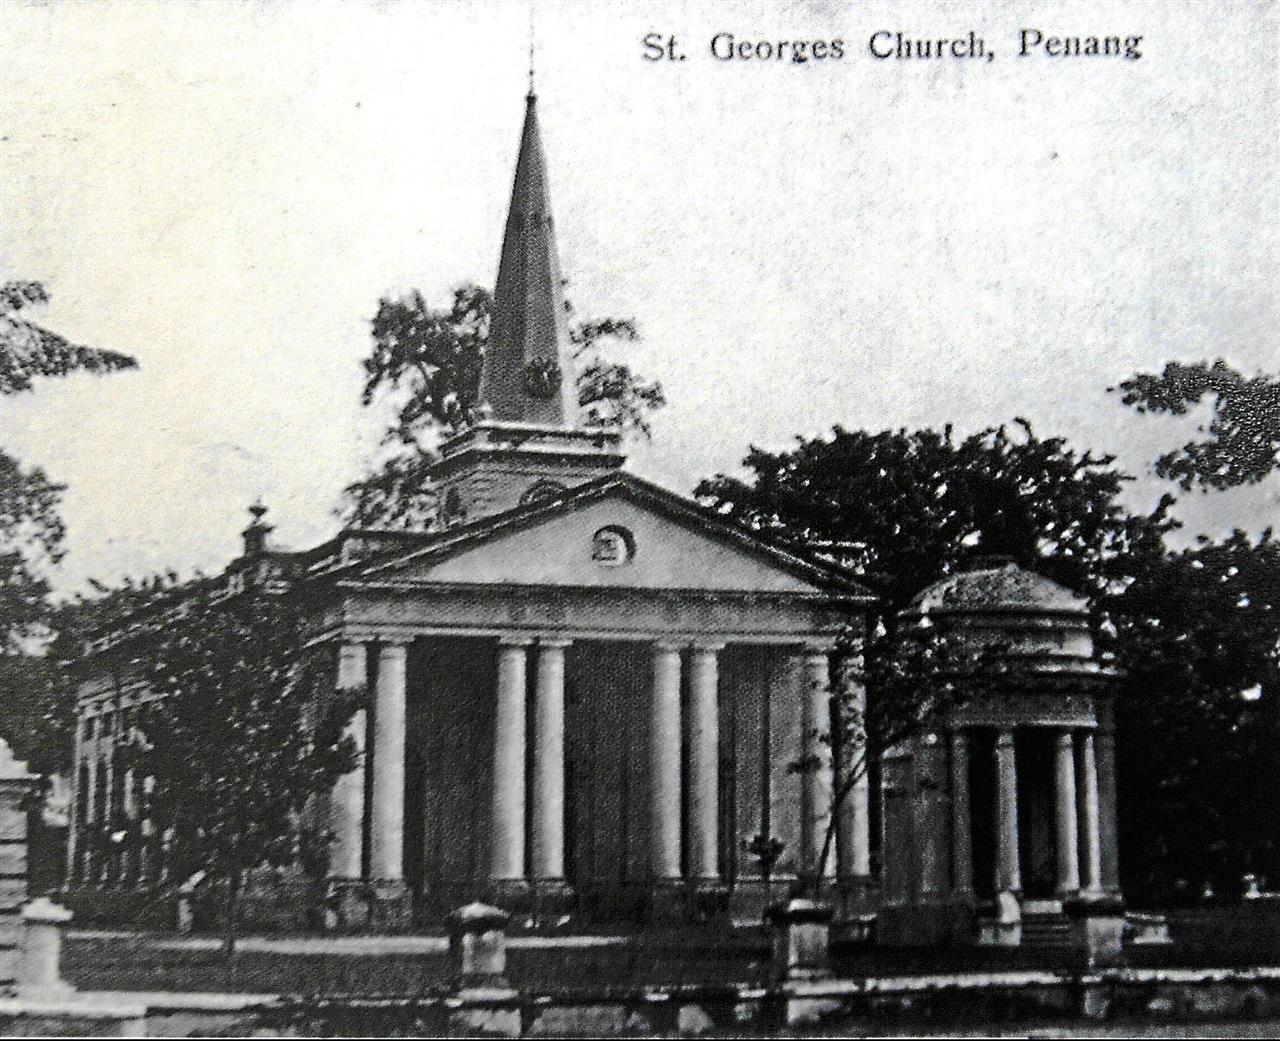 A photo of St George's Church taken in the late 19th century to early 20th century. Photo was reprinted from 'Penang Postcards Collection: 1899-1930s' written by Khoo Salma Nasution & Malcolm Wade. (NOTE: need to acknowledge book if want to use this)